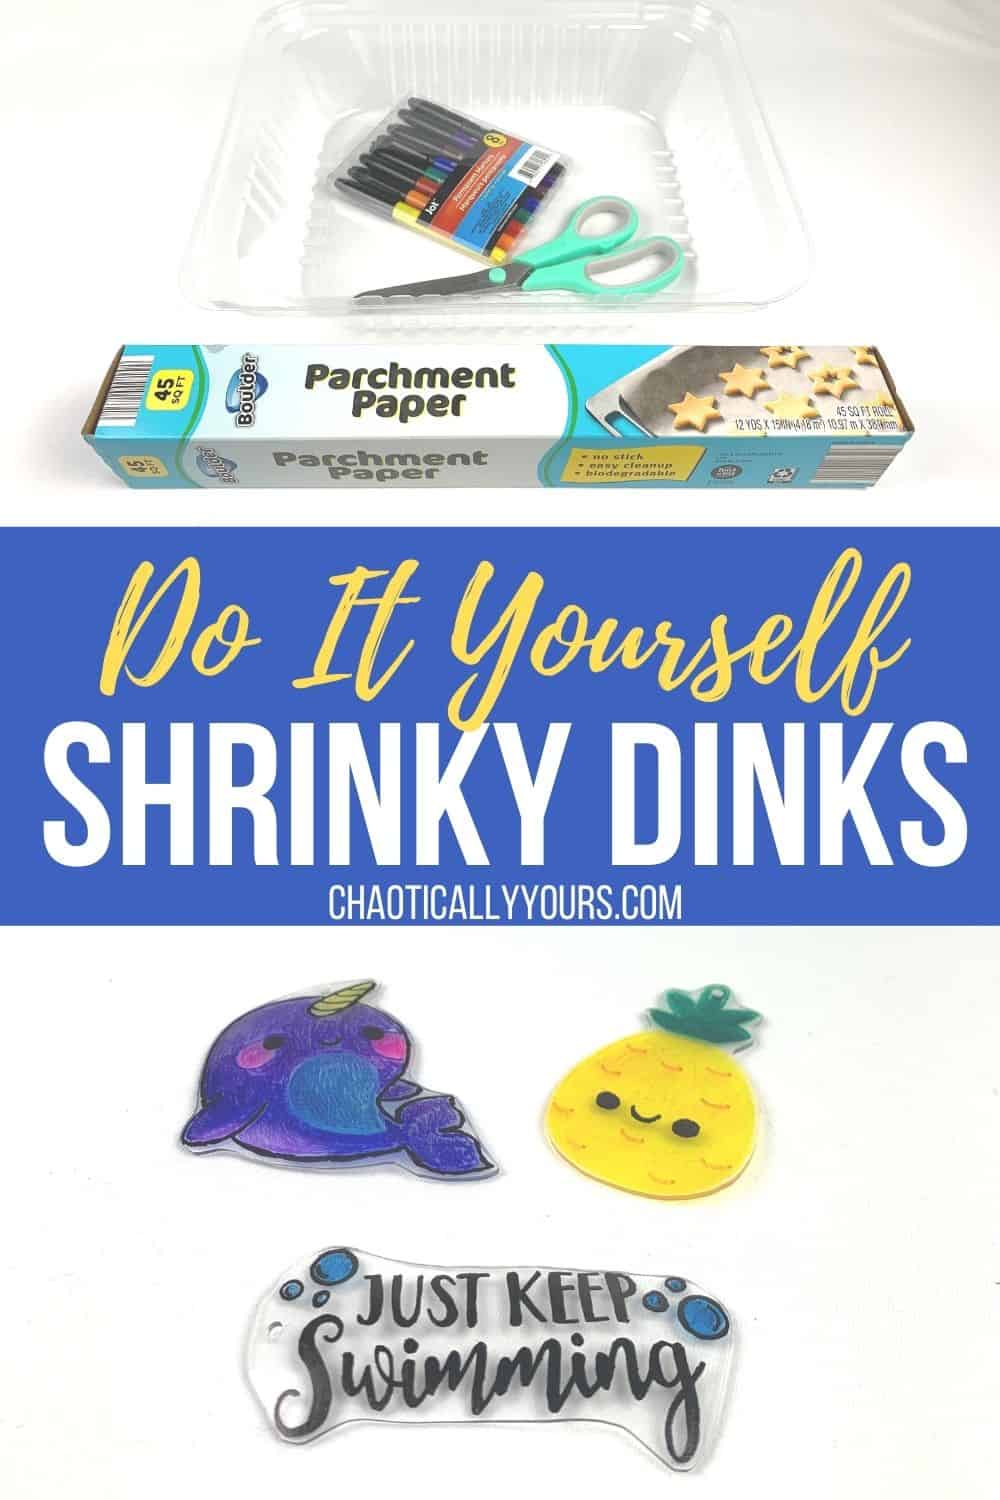 DIY Shrinky Dinks: Use Recycled Plastic To Make This Retro Craft! -  Chaotically Yours